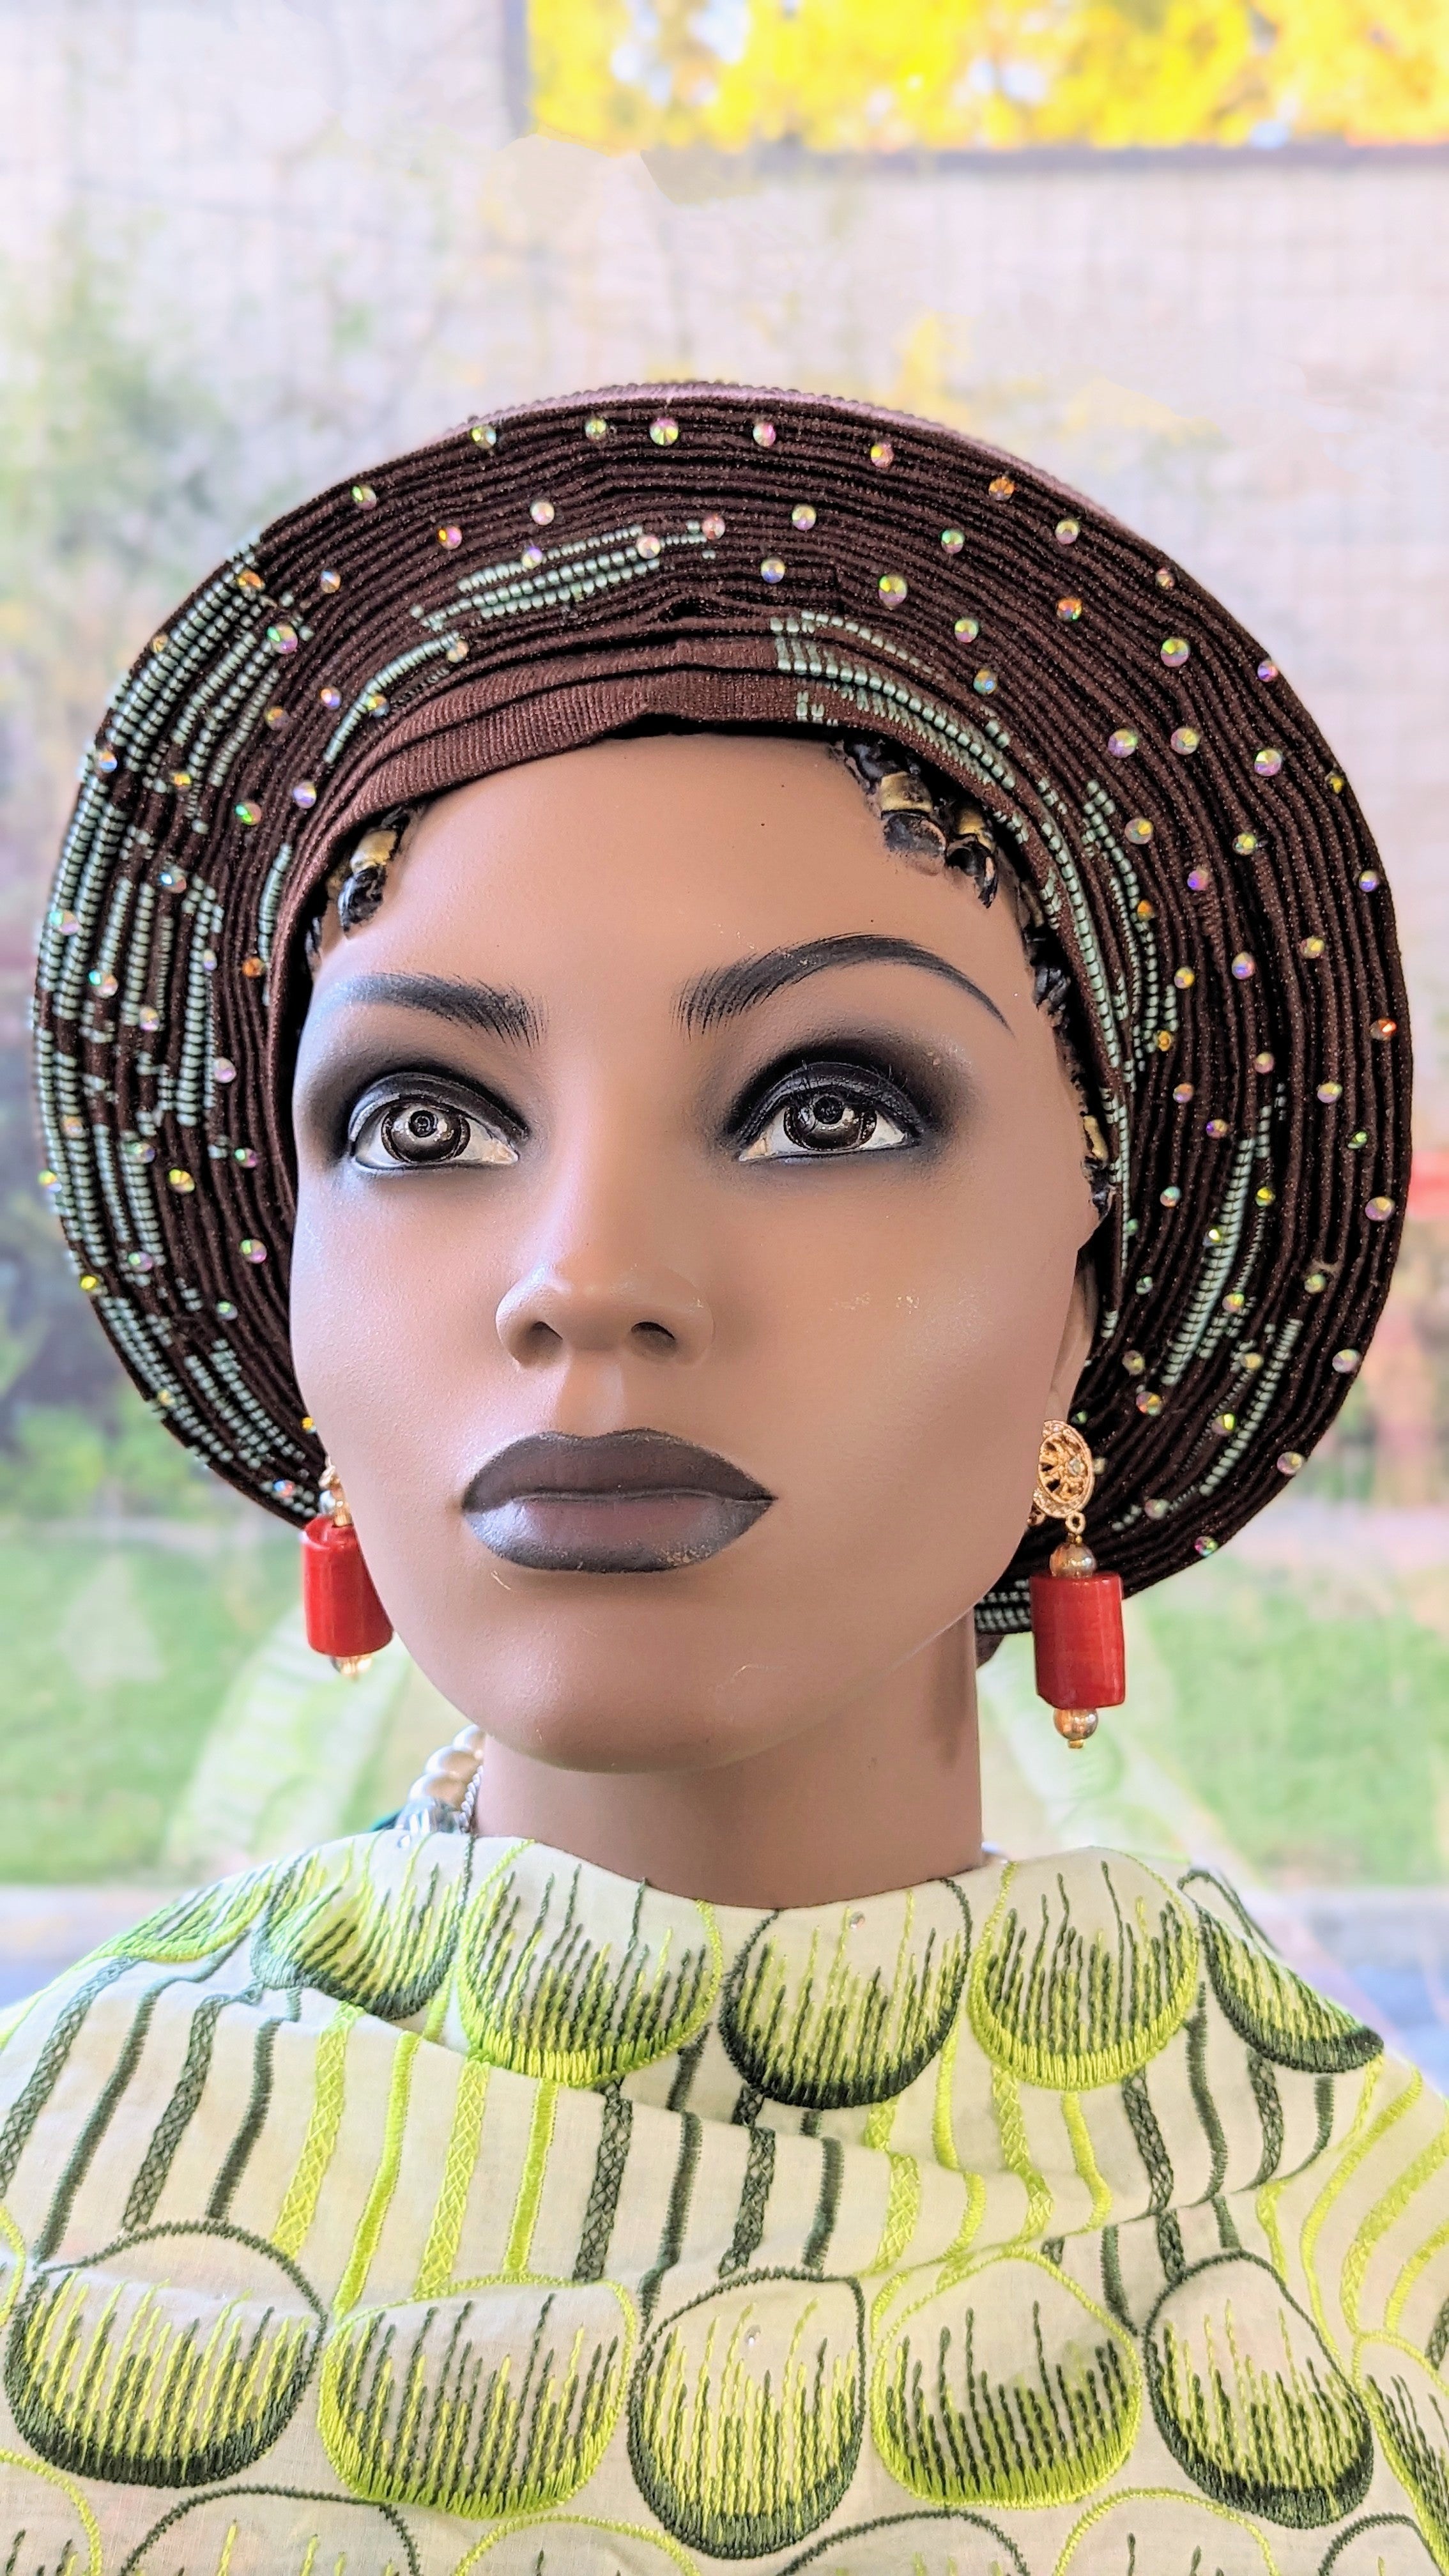 Chocolate-Brown Olamideh Pre-tied Aso Oke Head tie head wrap AutoGele with Mint-Green patterns-DPACBMG11